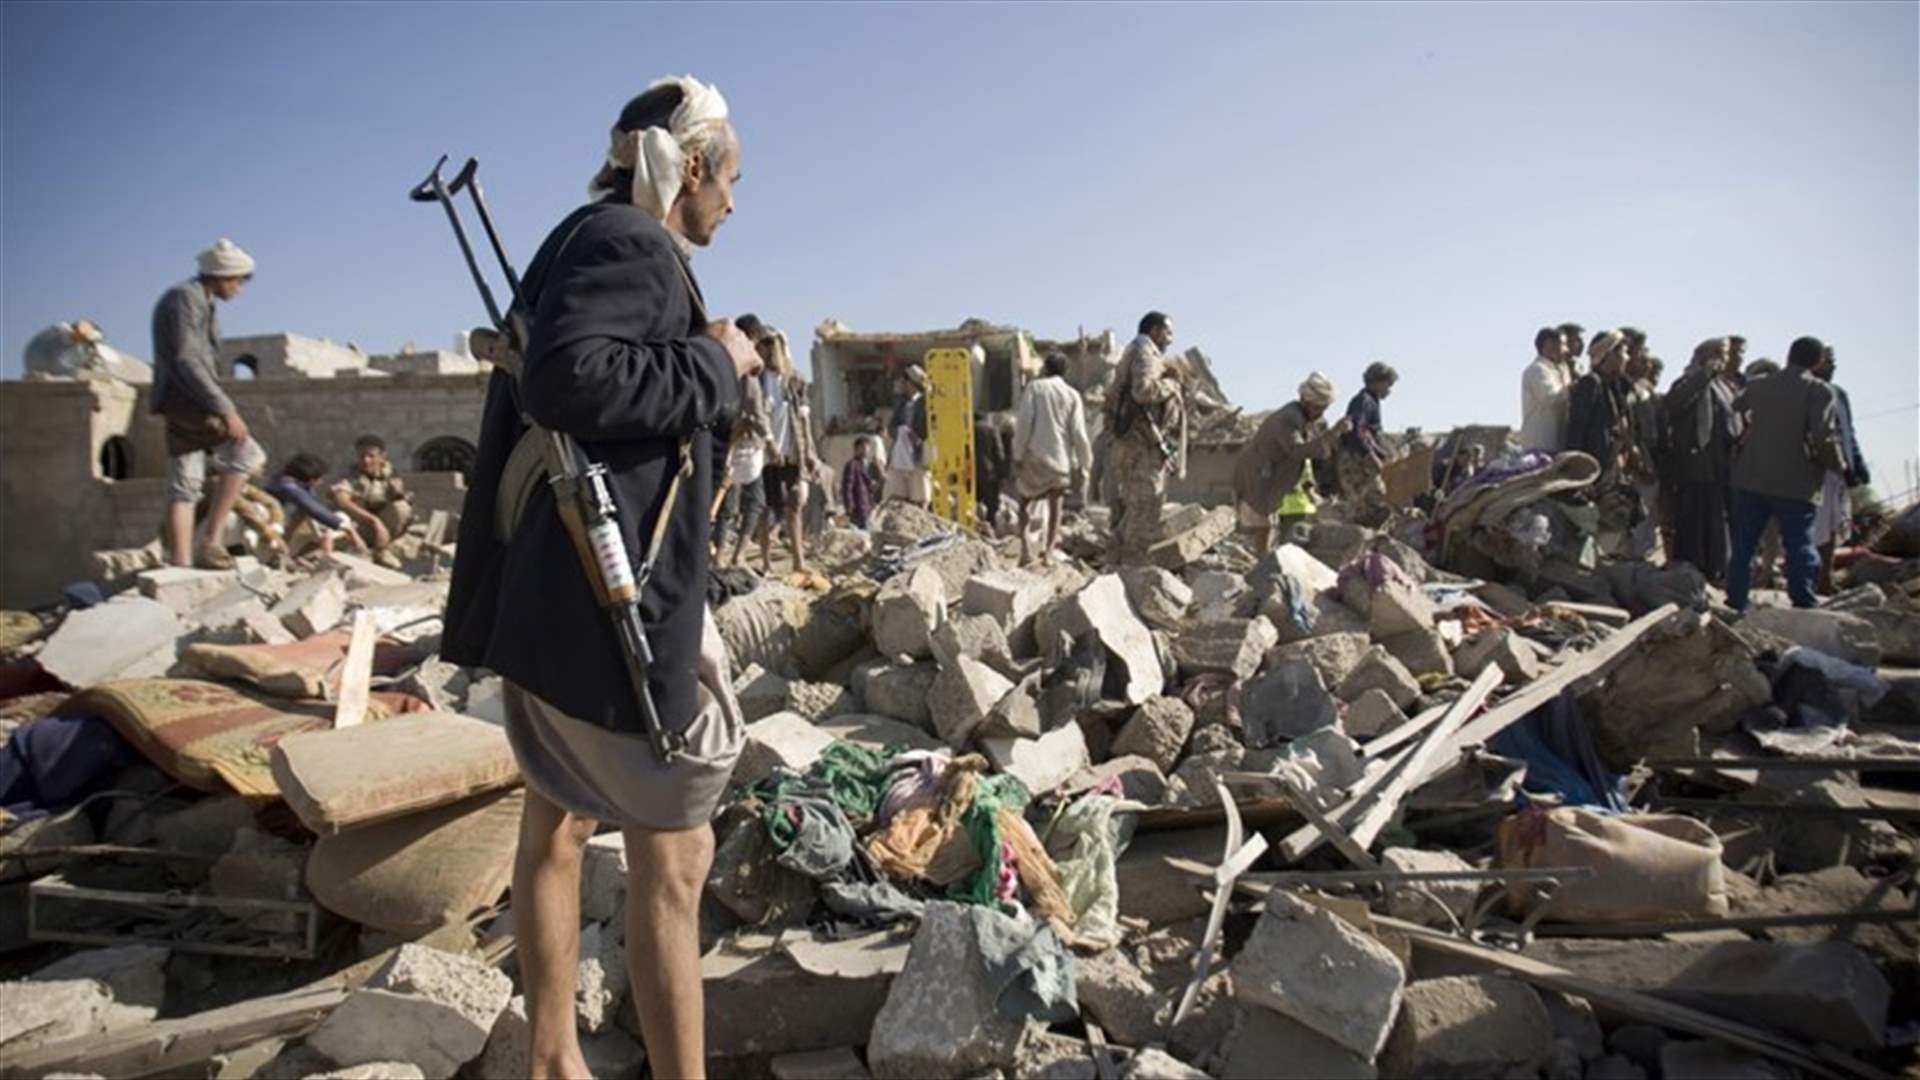 Attack hits mourners in Yemen, killing 9 women, 1 child - residents